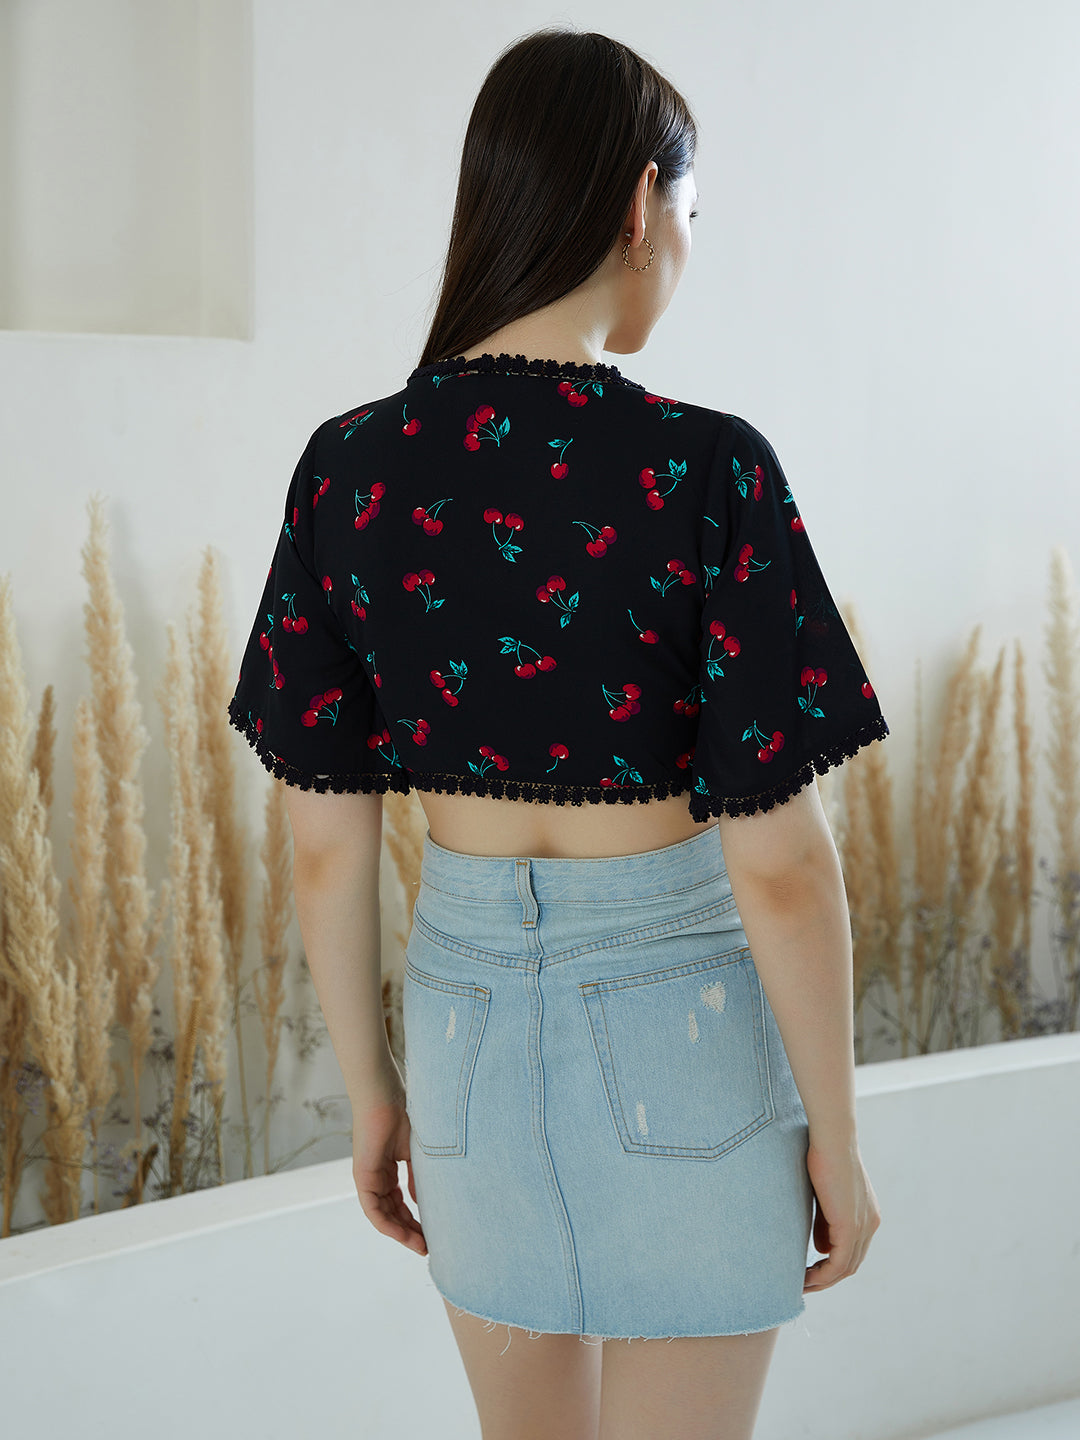 Berrylush Women Black & Red Cherry Printed V-Neck Lace Waist Tie-Up Shirt-Styled Crop Top